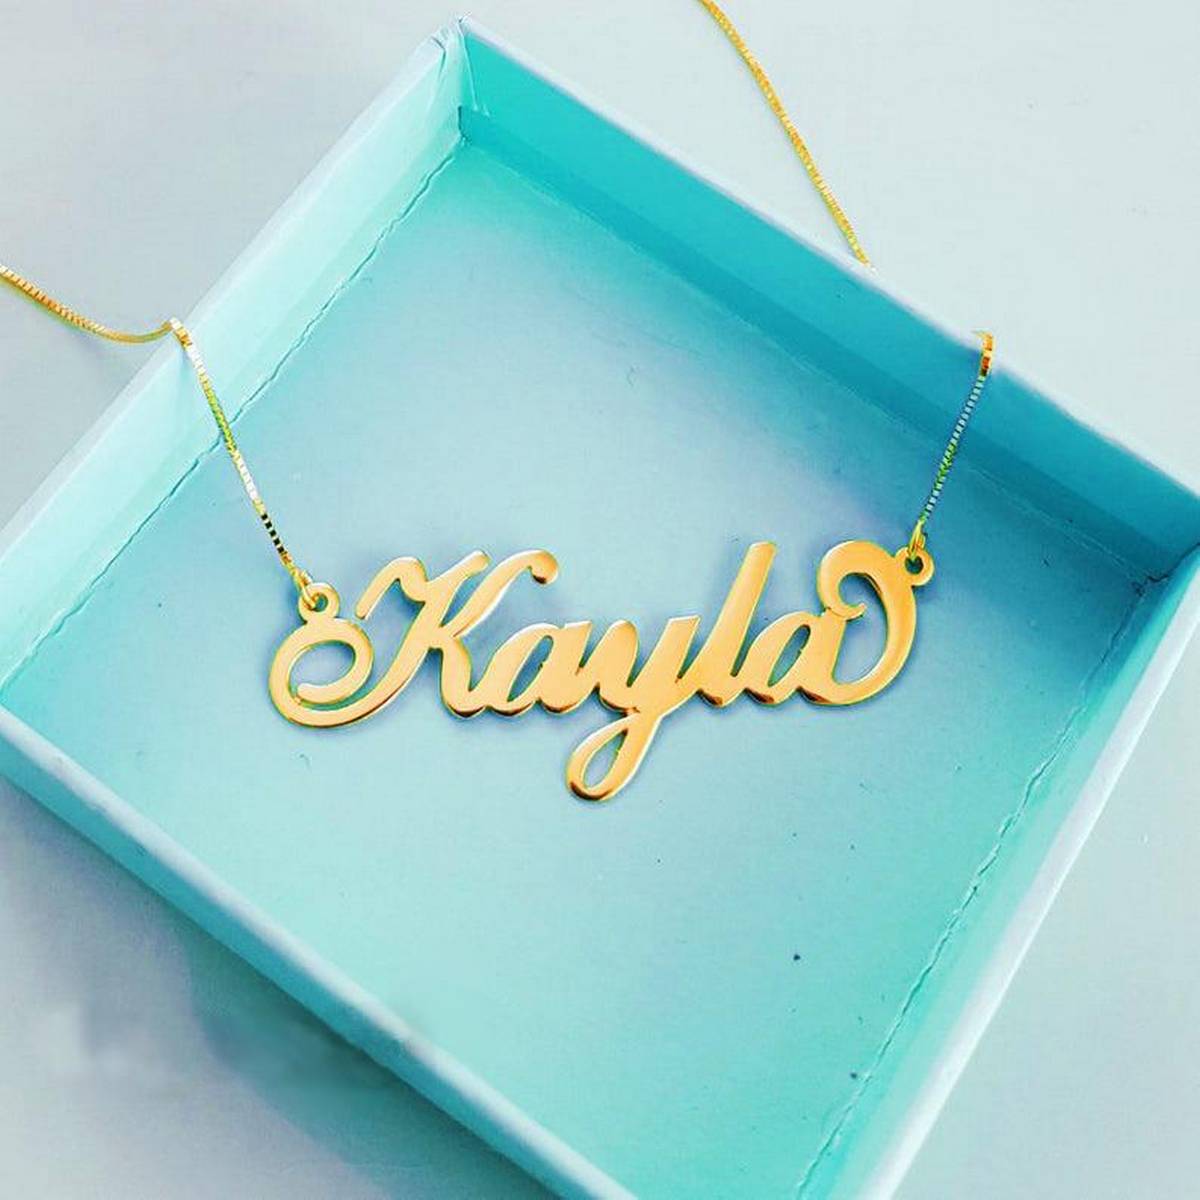 Name Locket Gold Plated Custom Made Simple Design Single Personalized Name 18k Gold Plated Any Name Gift Necklace For Men Women Name Locket Buy Online Name Locket Buy Online Pakistan Name Locket Designs